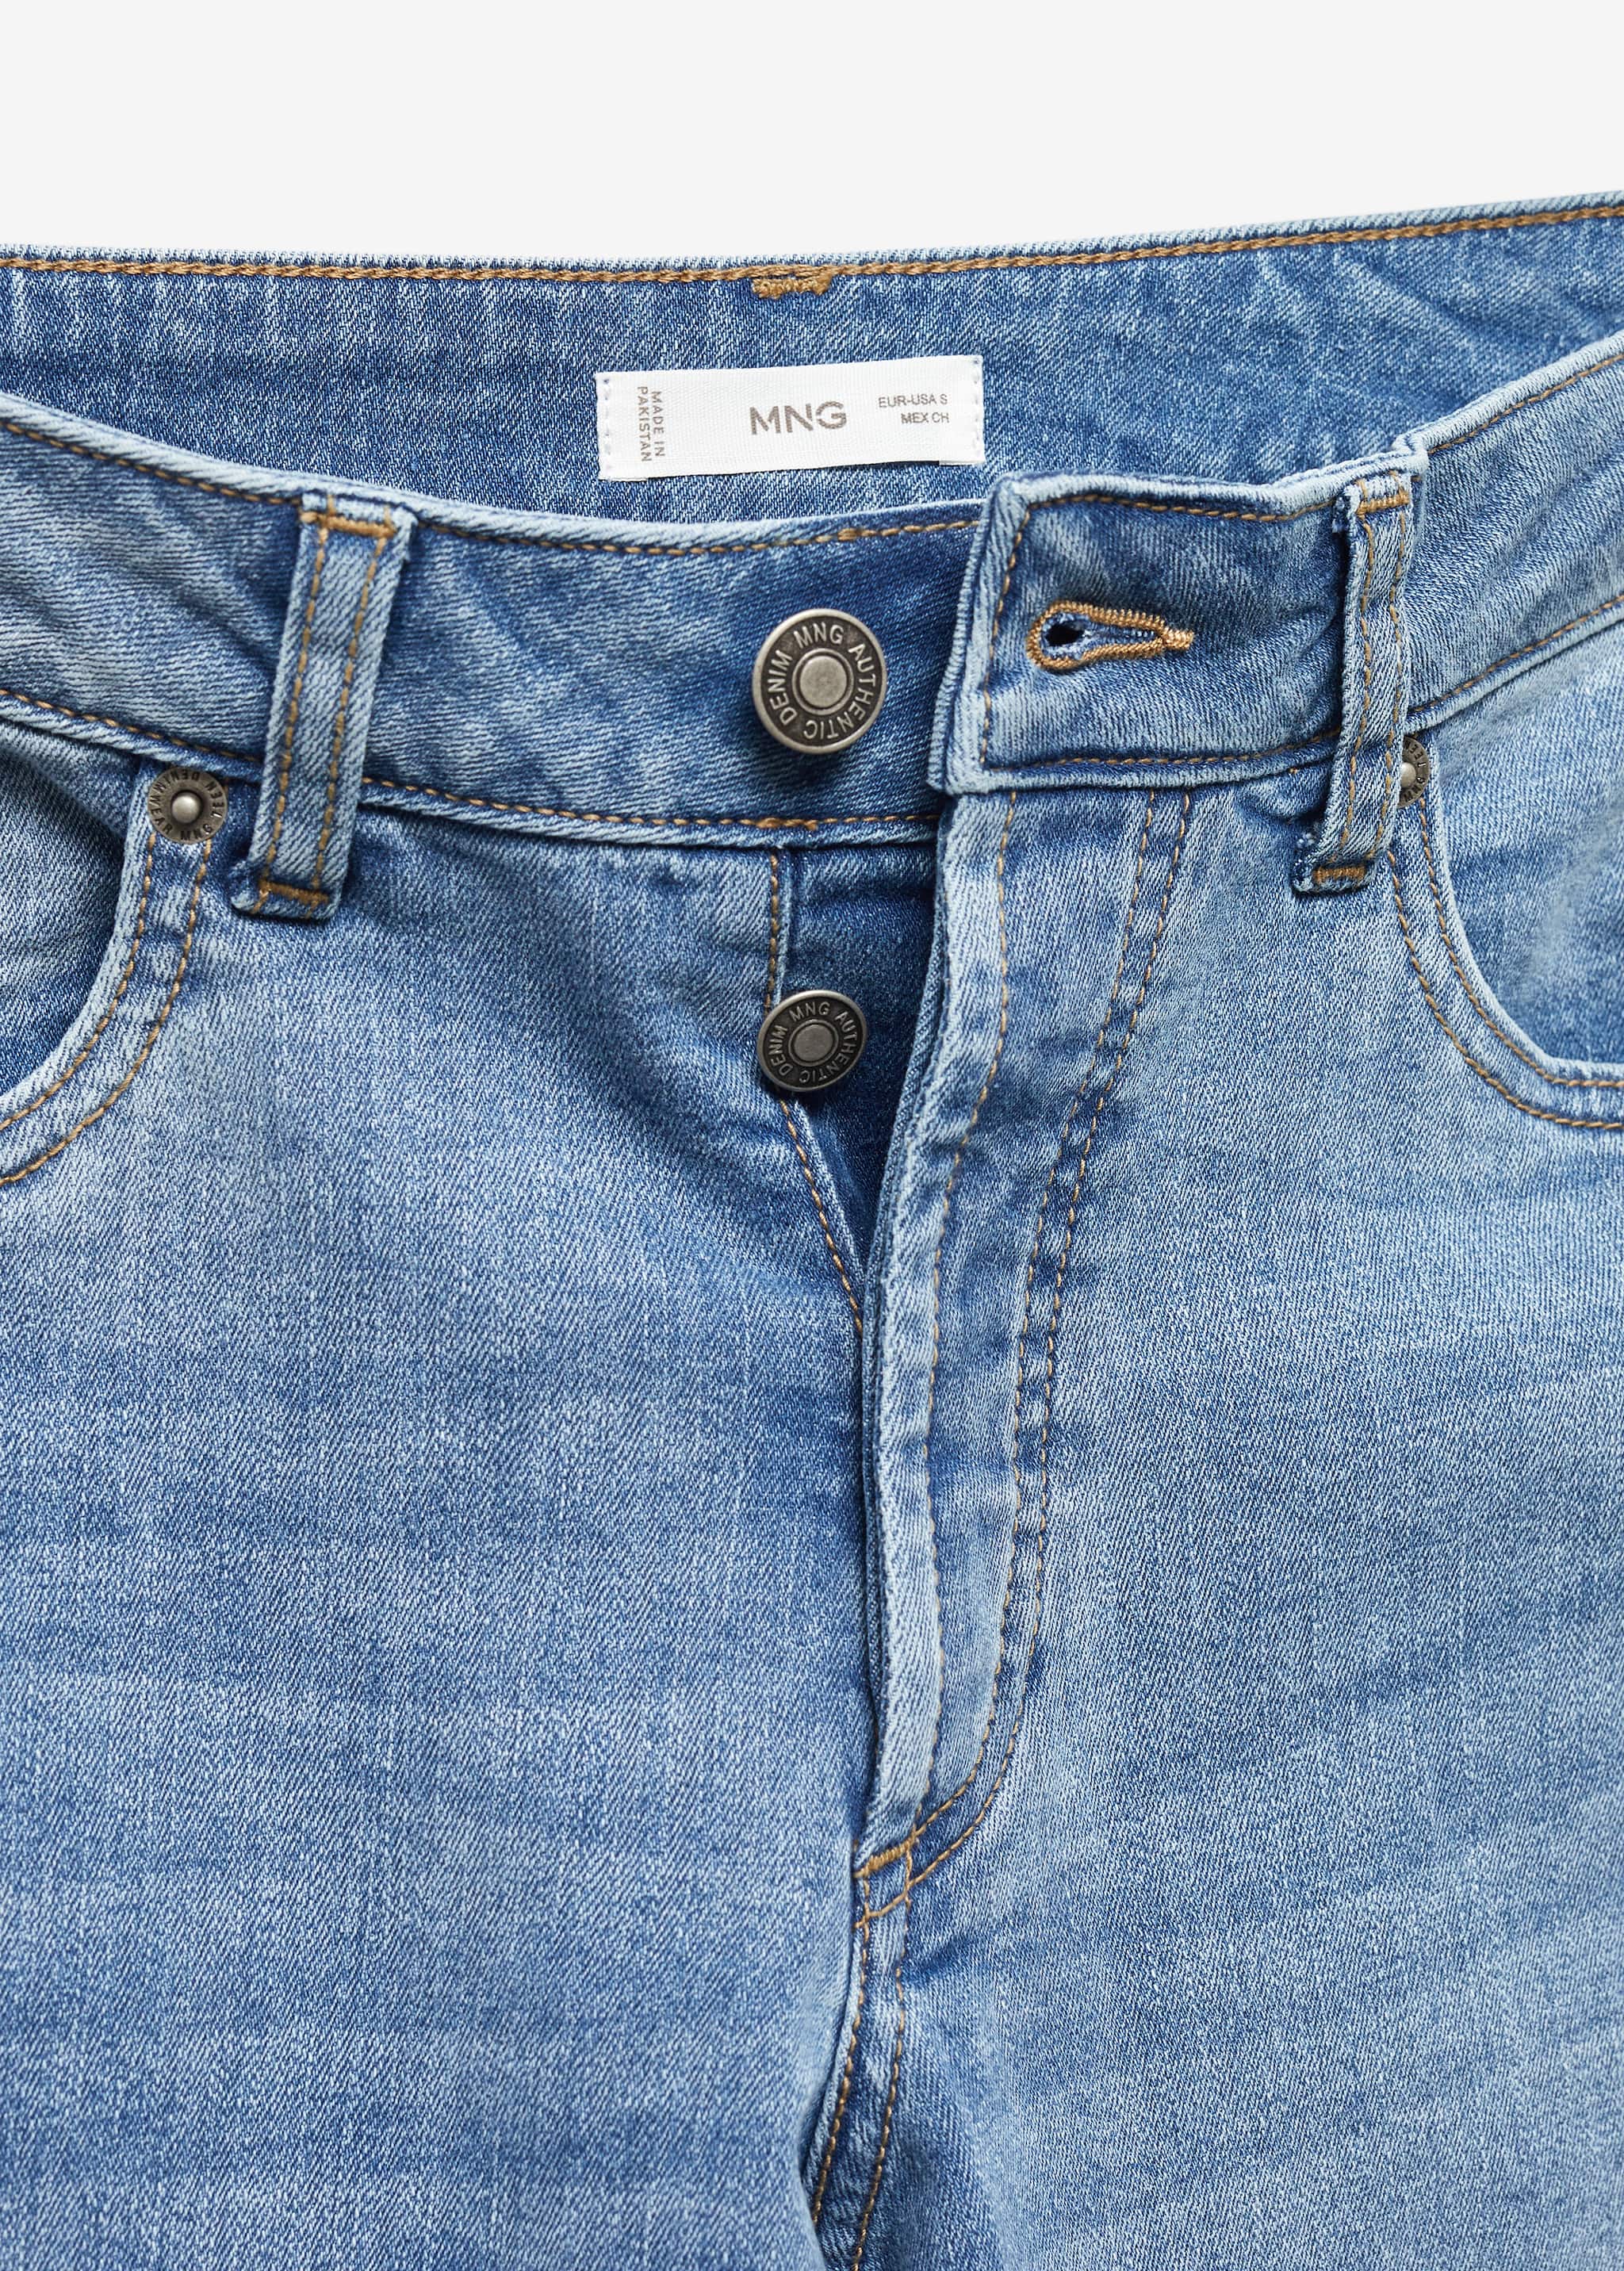 Slim fit jeans - Details of the article 8